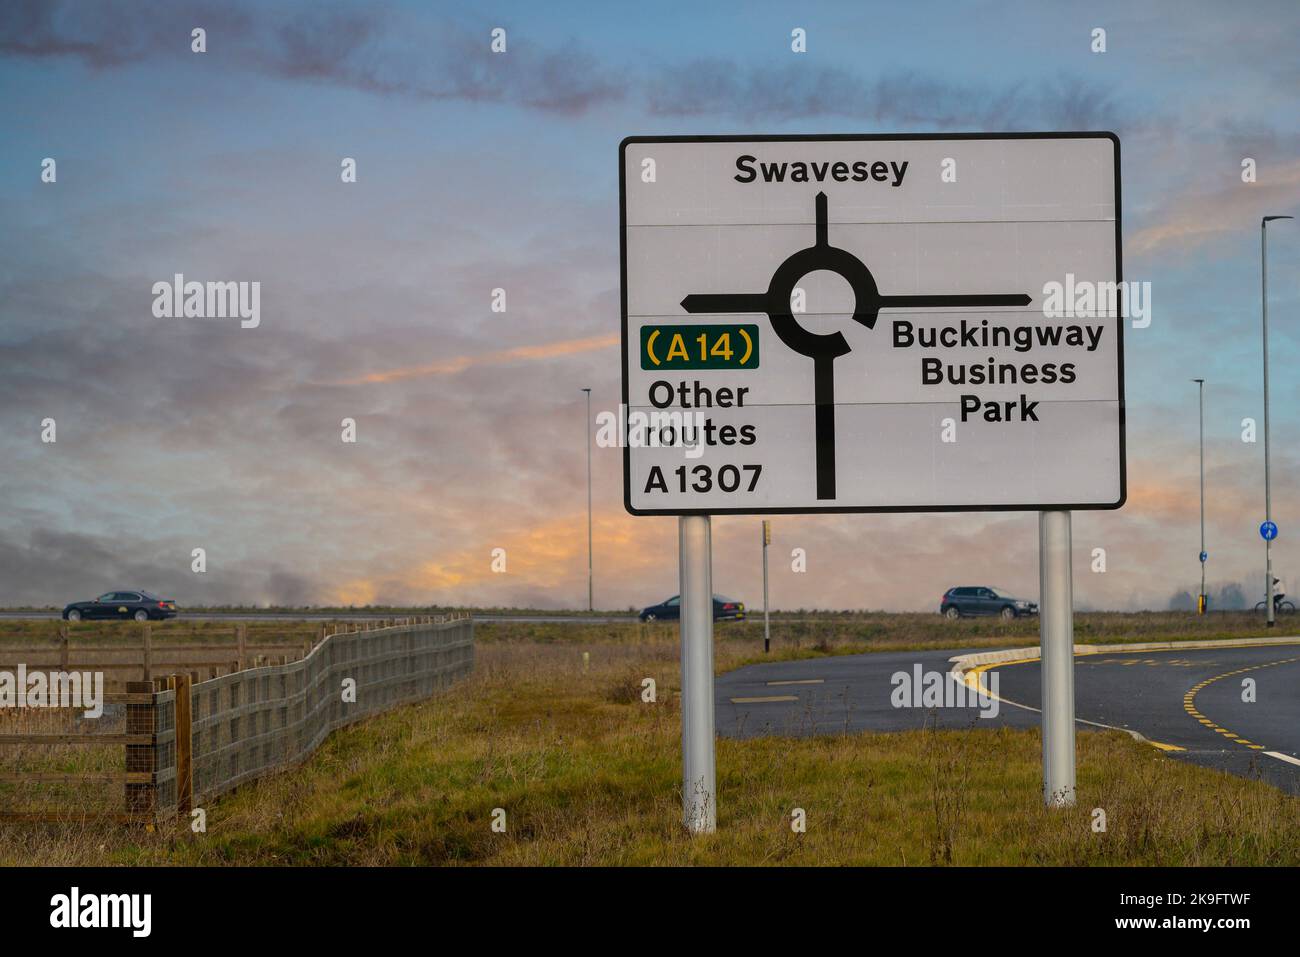 Roundabout sign off the A14 trunk road, Cambridgeshire, England. Stock Photo